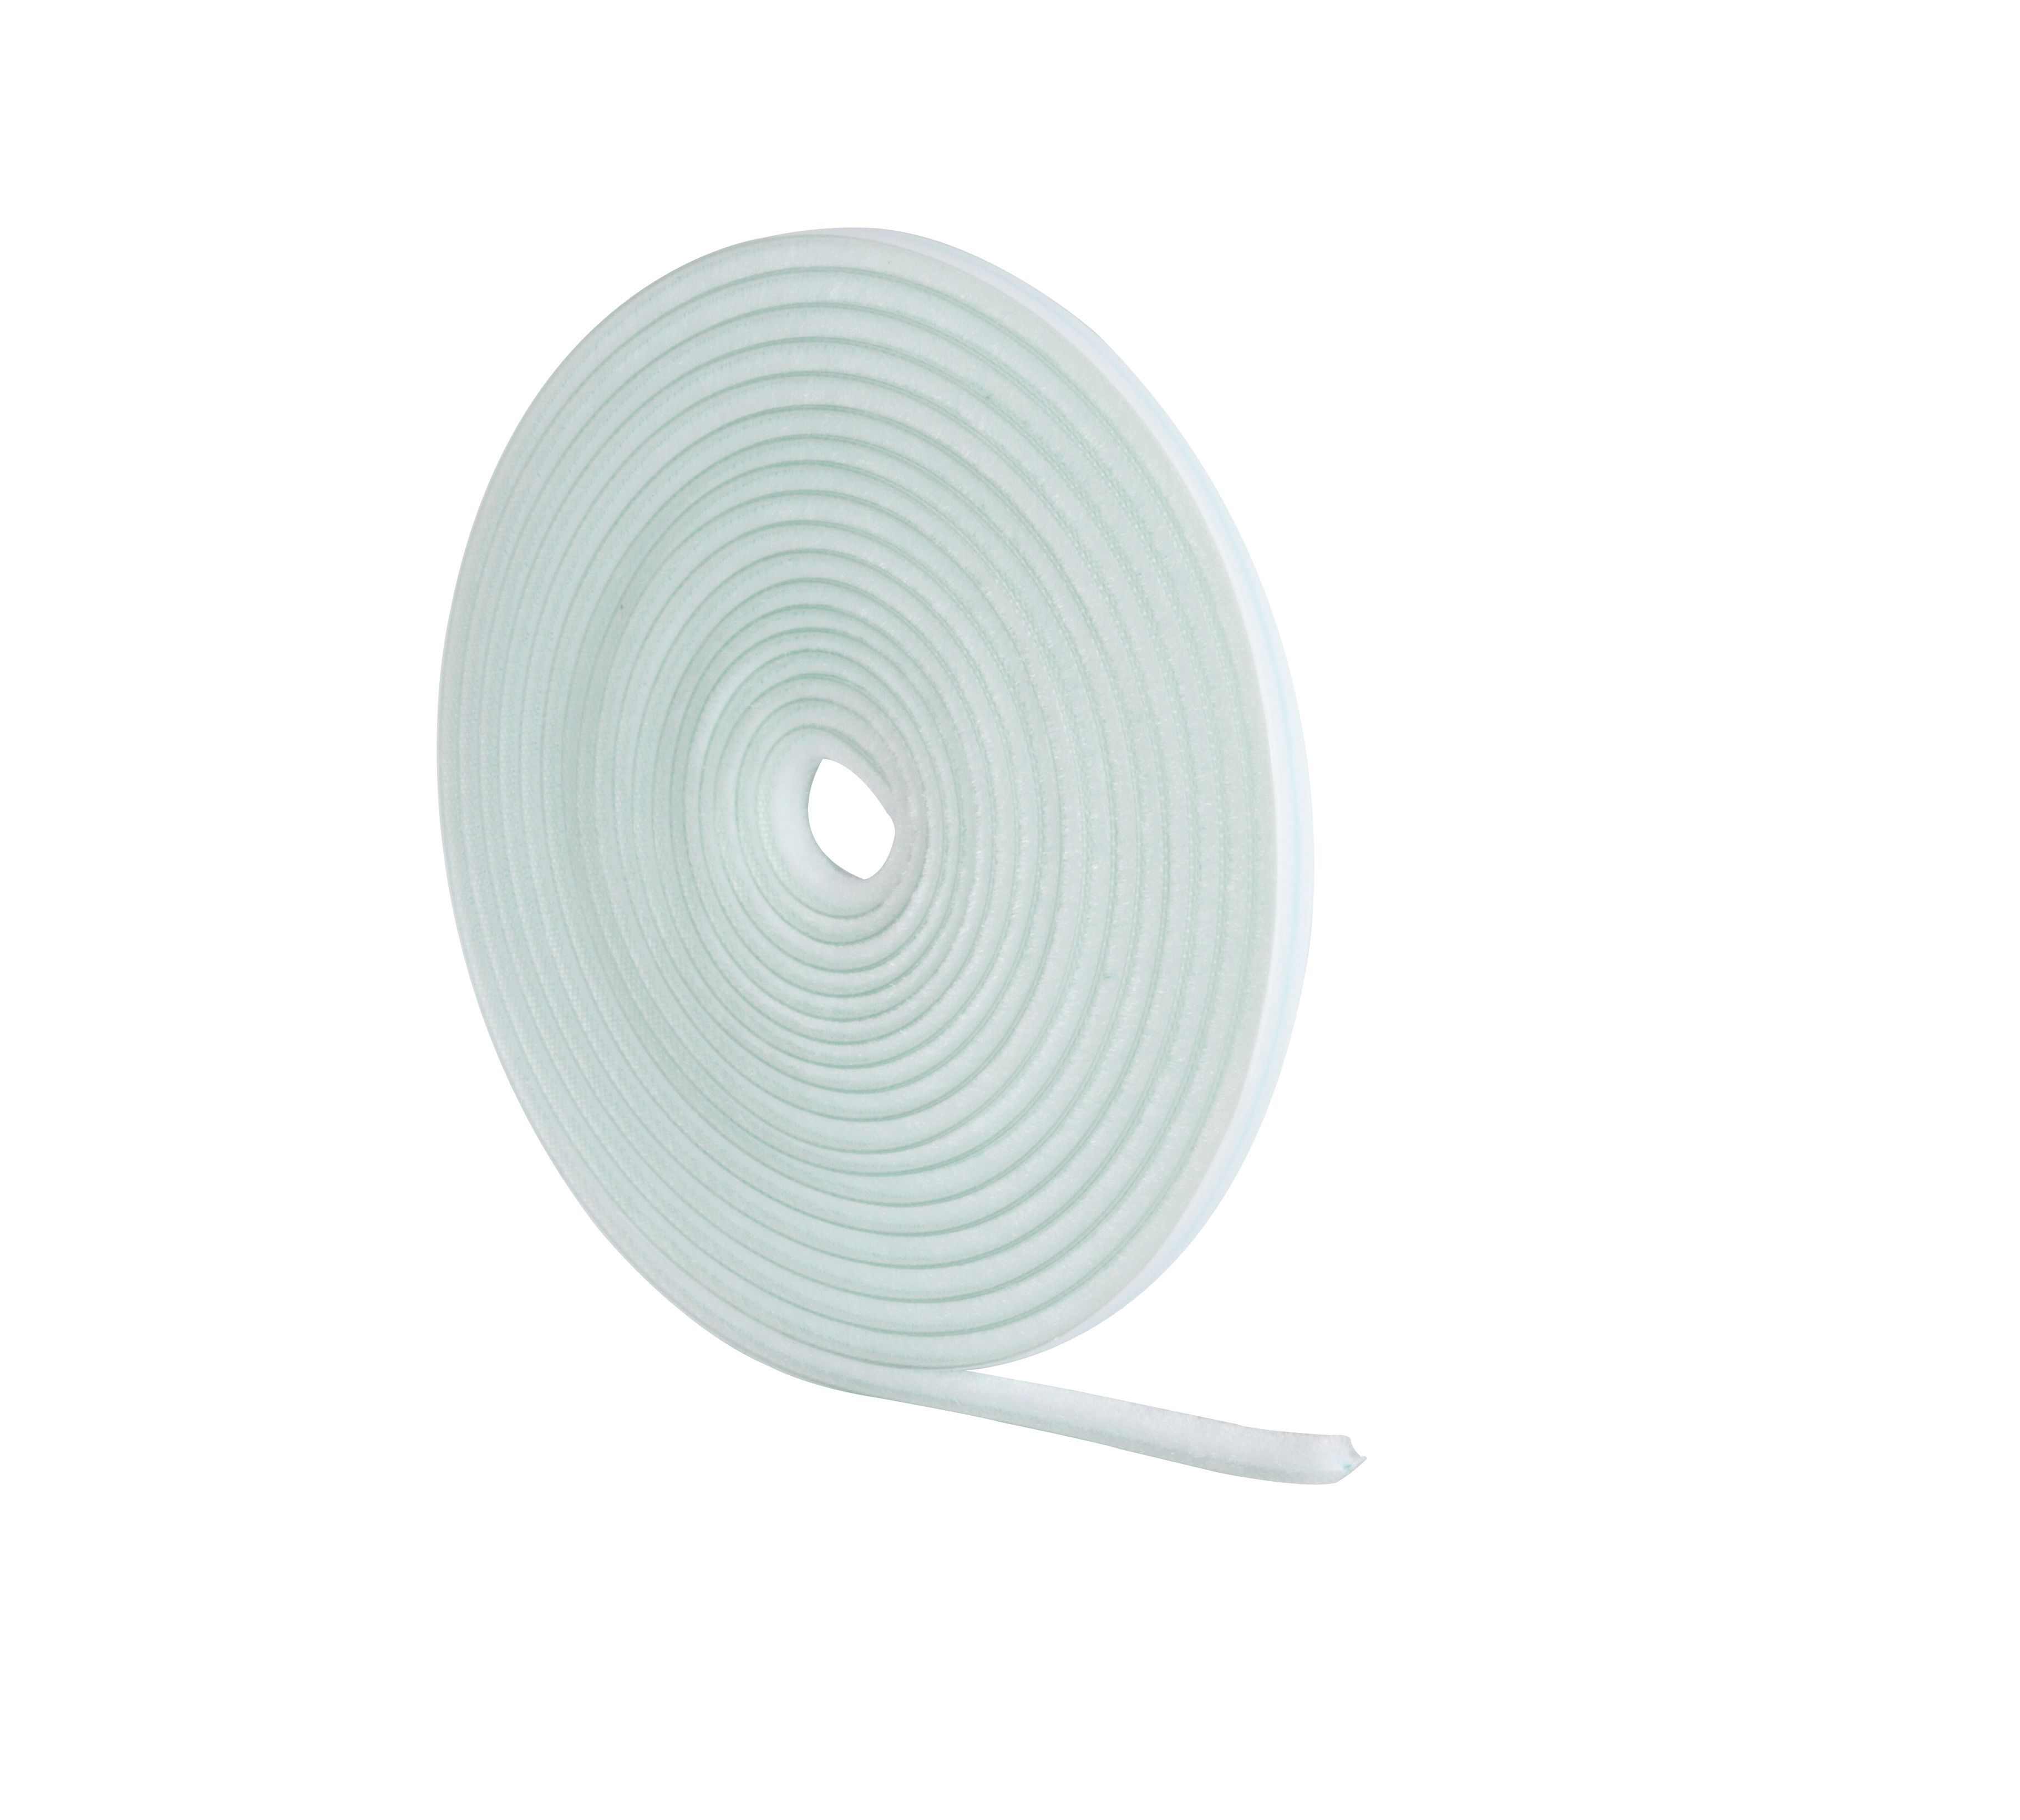 Image of Wickes 5m Pile Tape Draught Seal - White